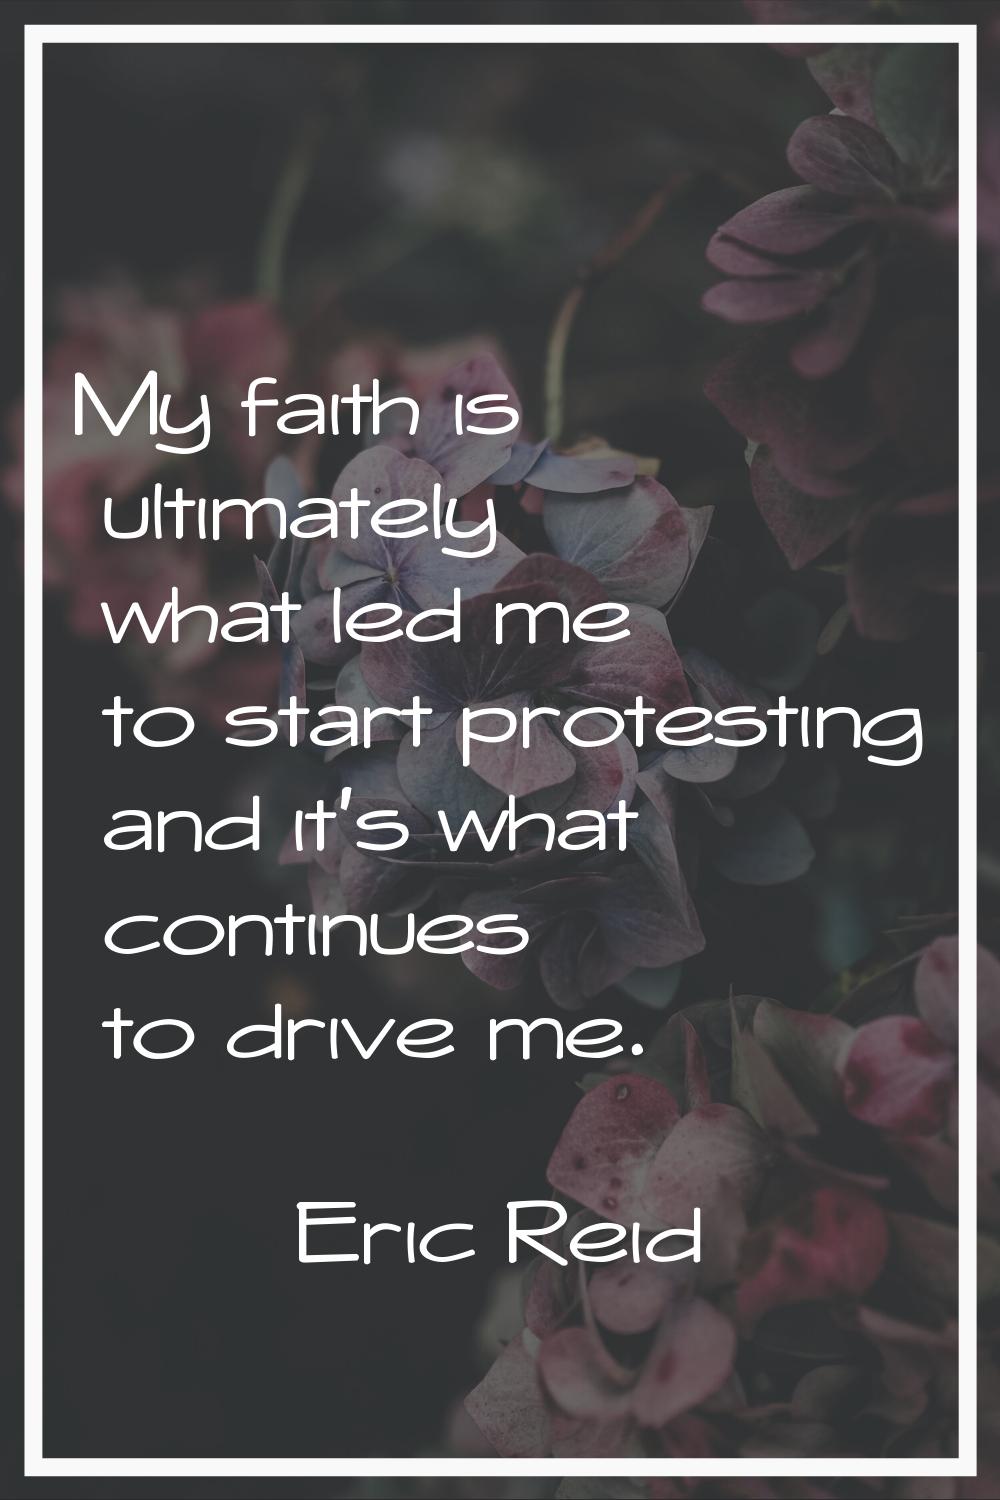 My faith is ultimately what led me to start protesting and it's what continues to drive me.